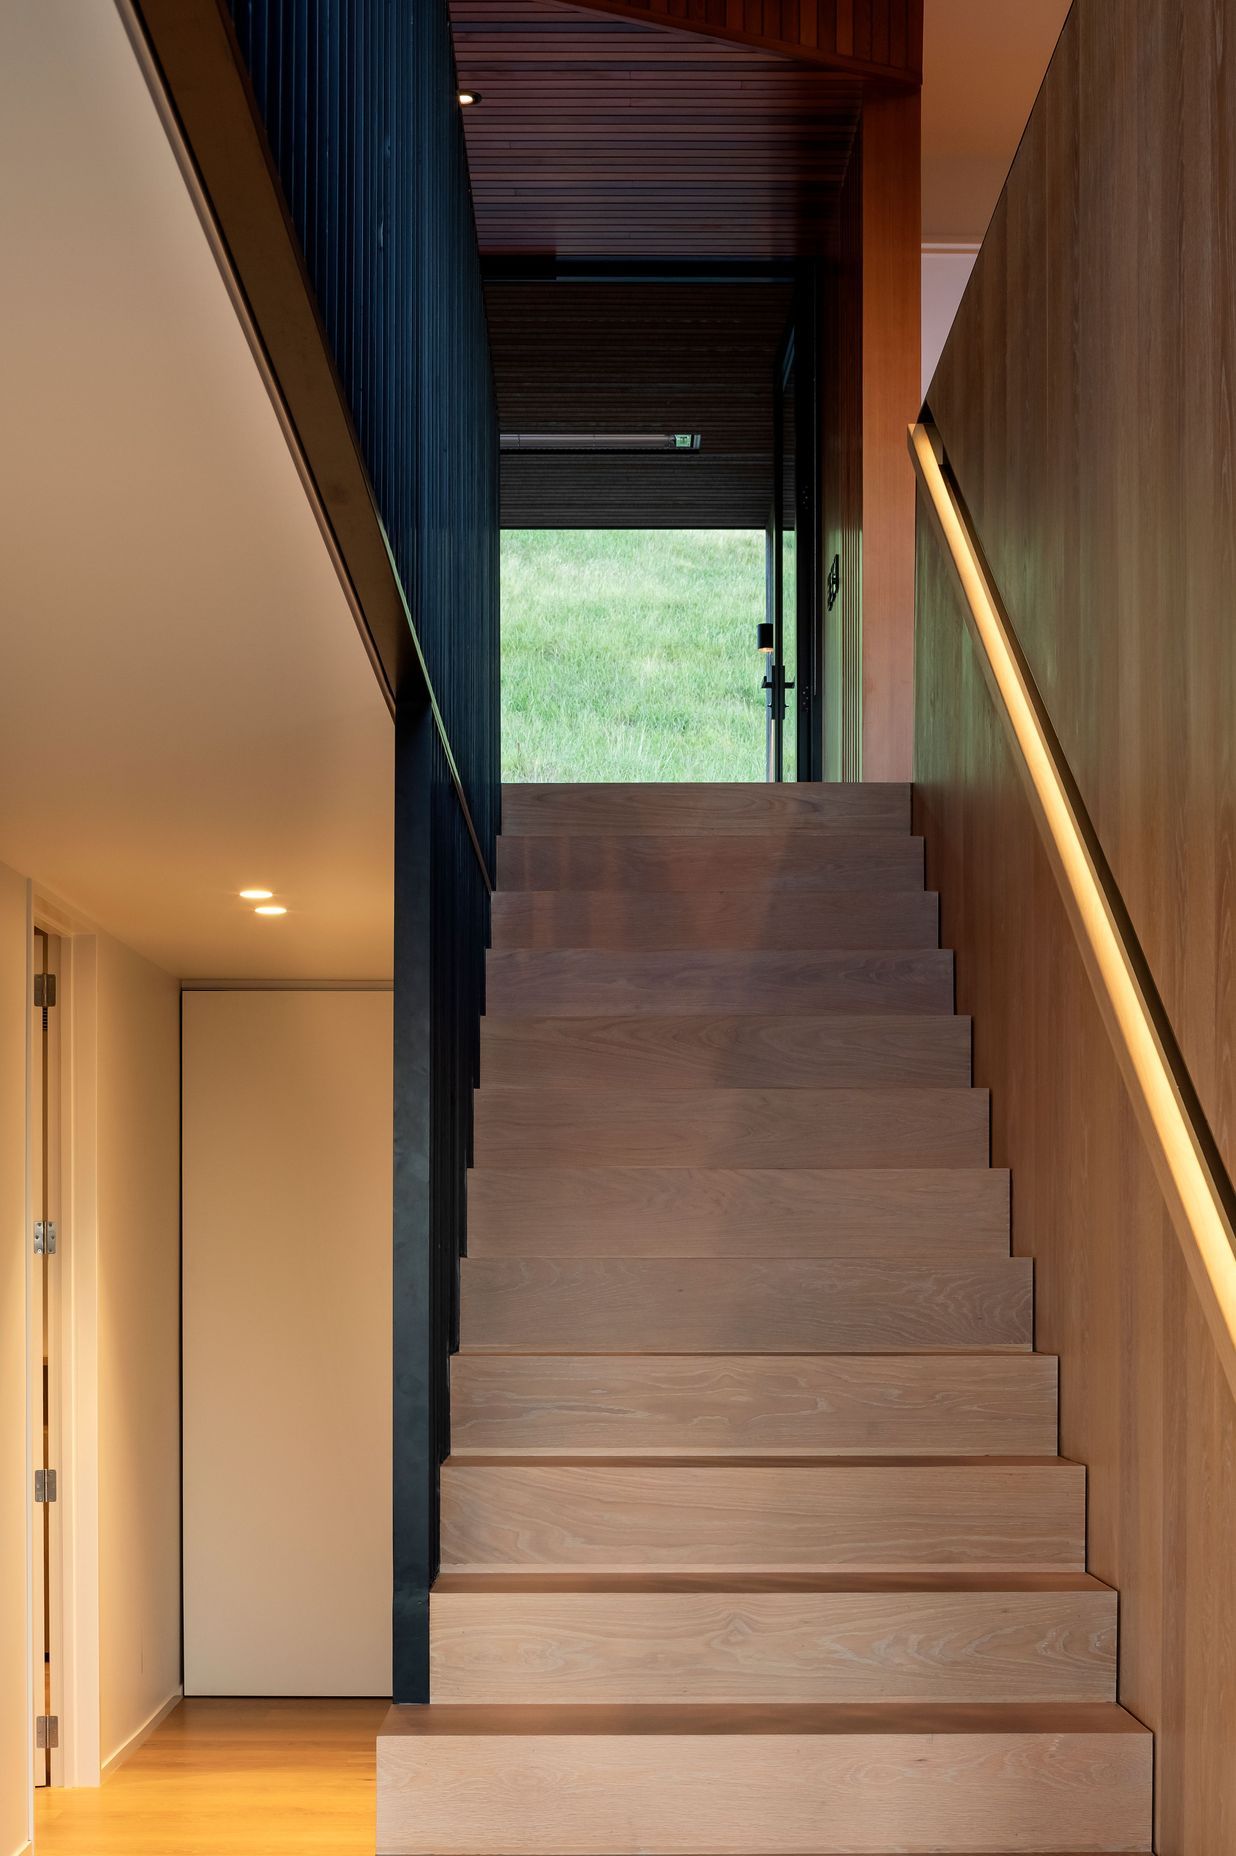 The central staircase leads up to the living spaces.